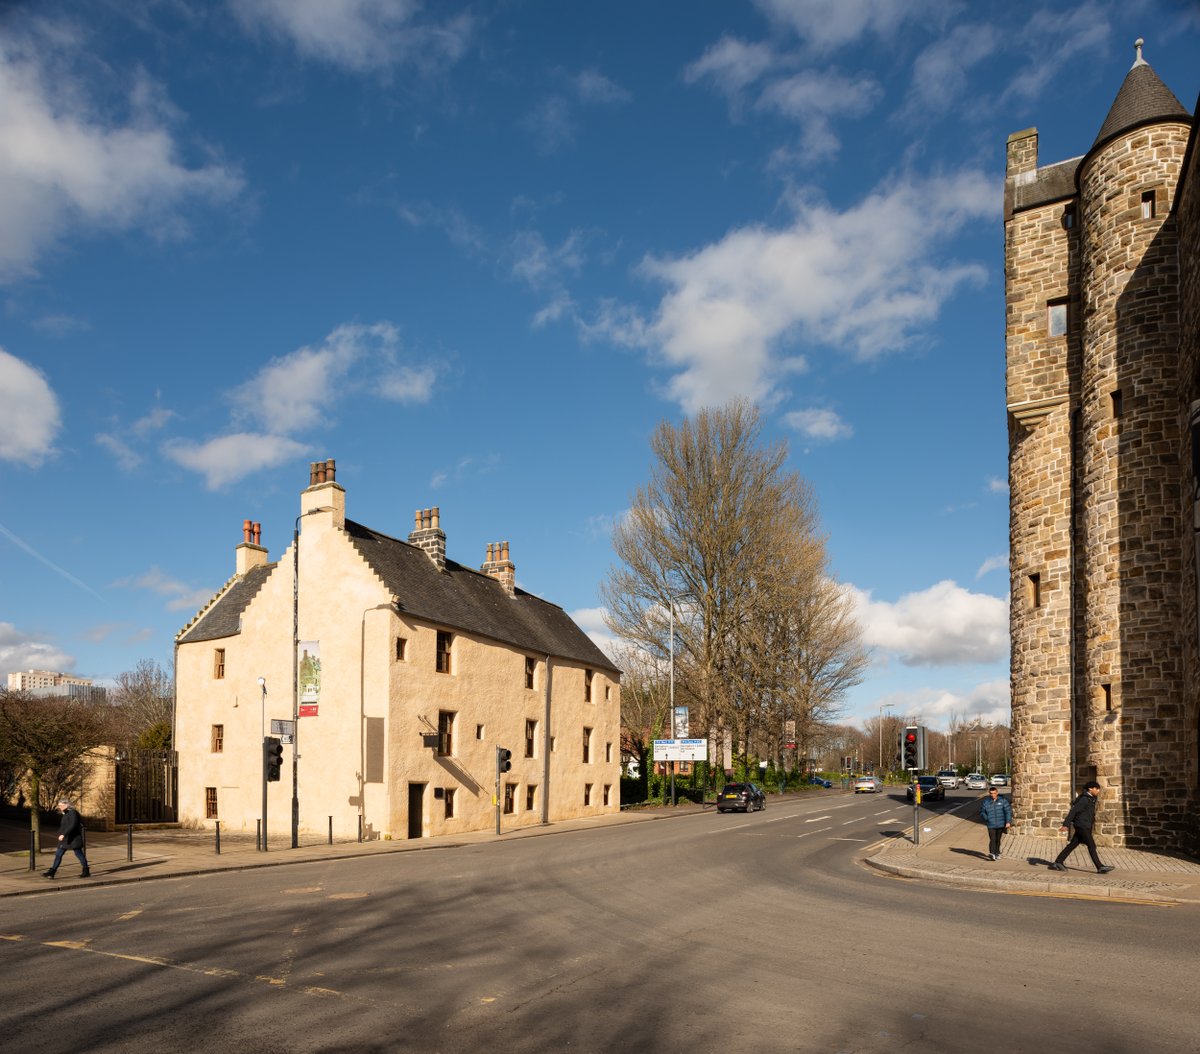 Provand’s Lordship, the oldest house in Glasgow, will host a series of family-friendly activities during the Easter school holidays to mark its reopening. Read more about what’s planned here 👉 glasgowlife.org.uk/news/family-fr…